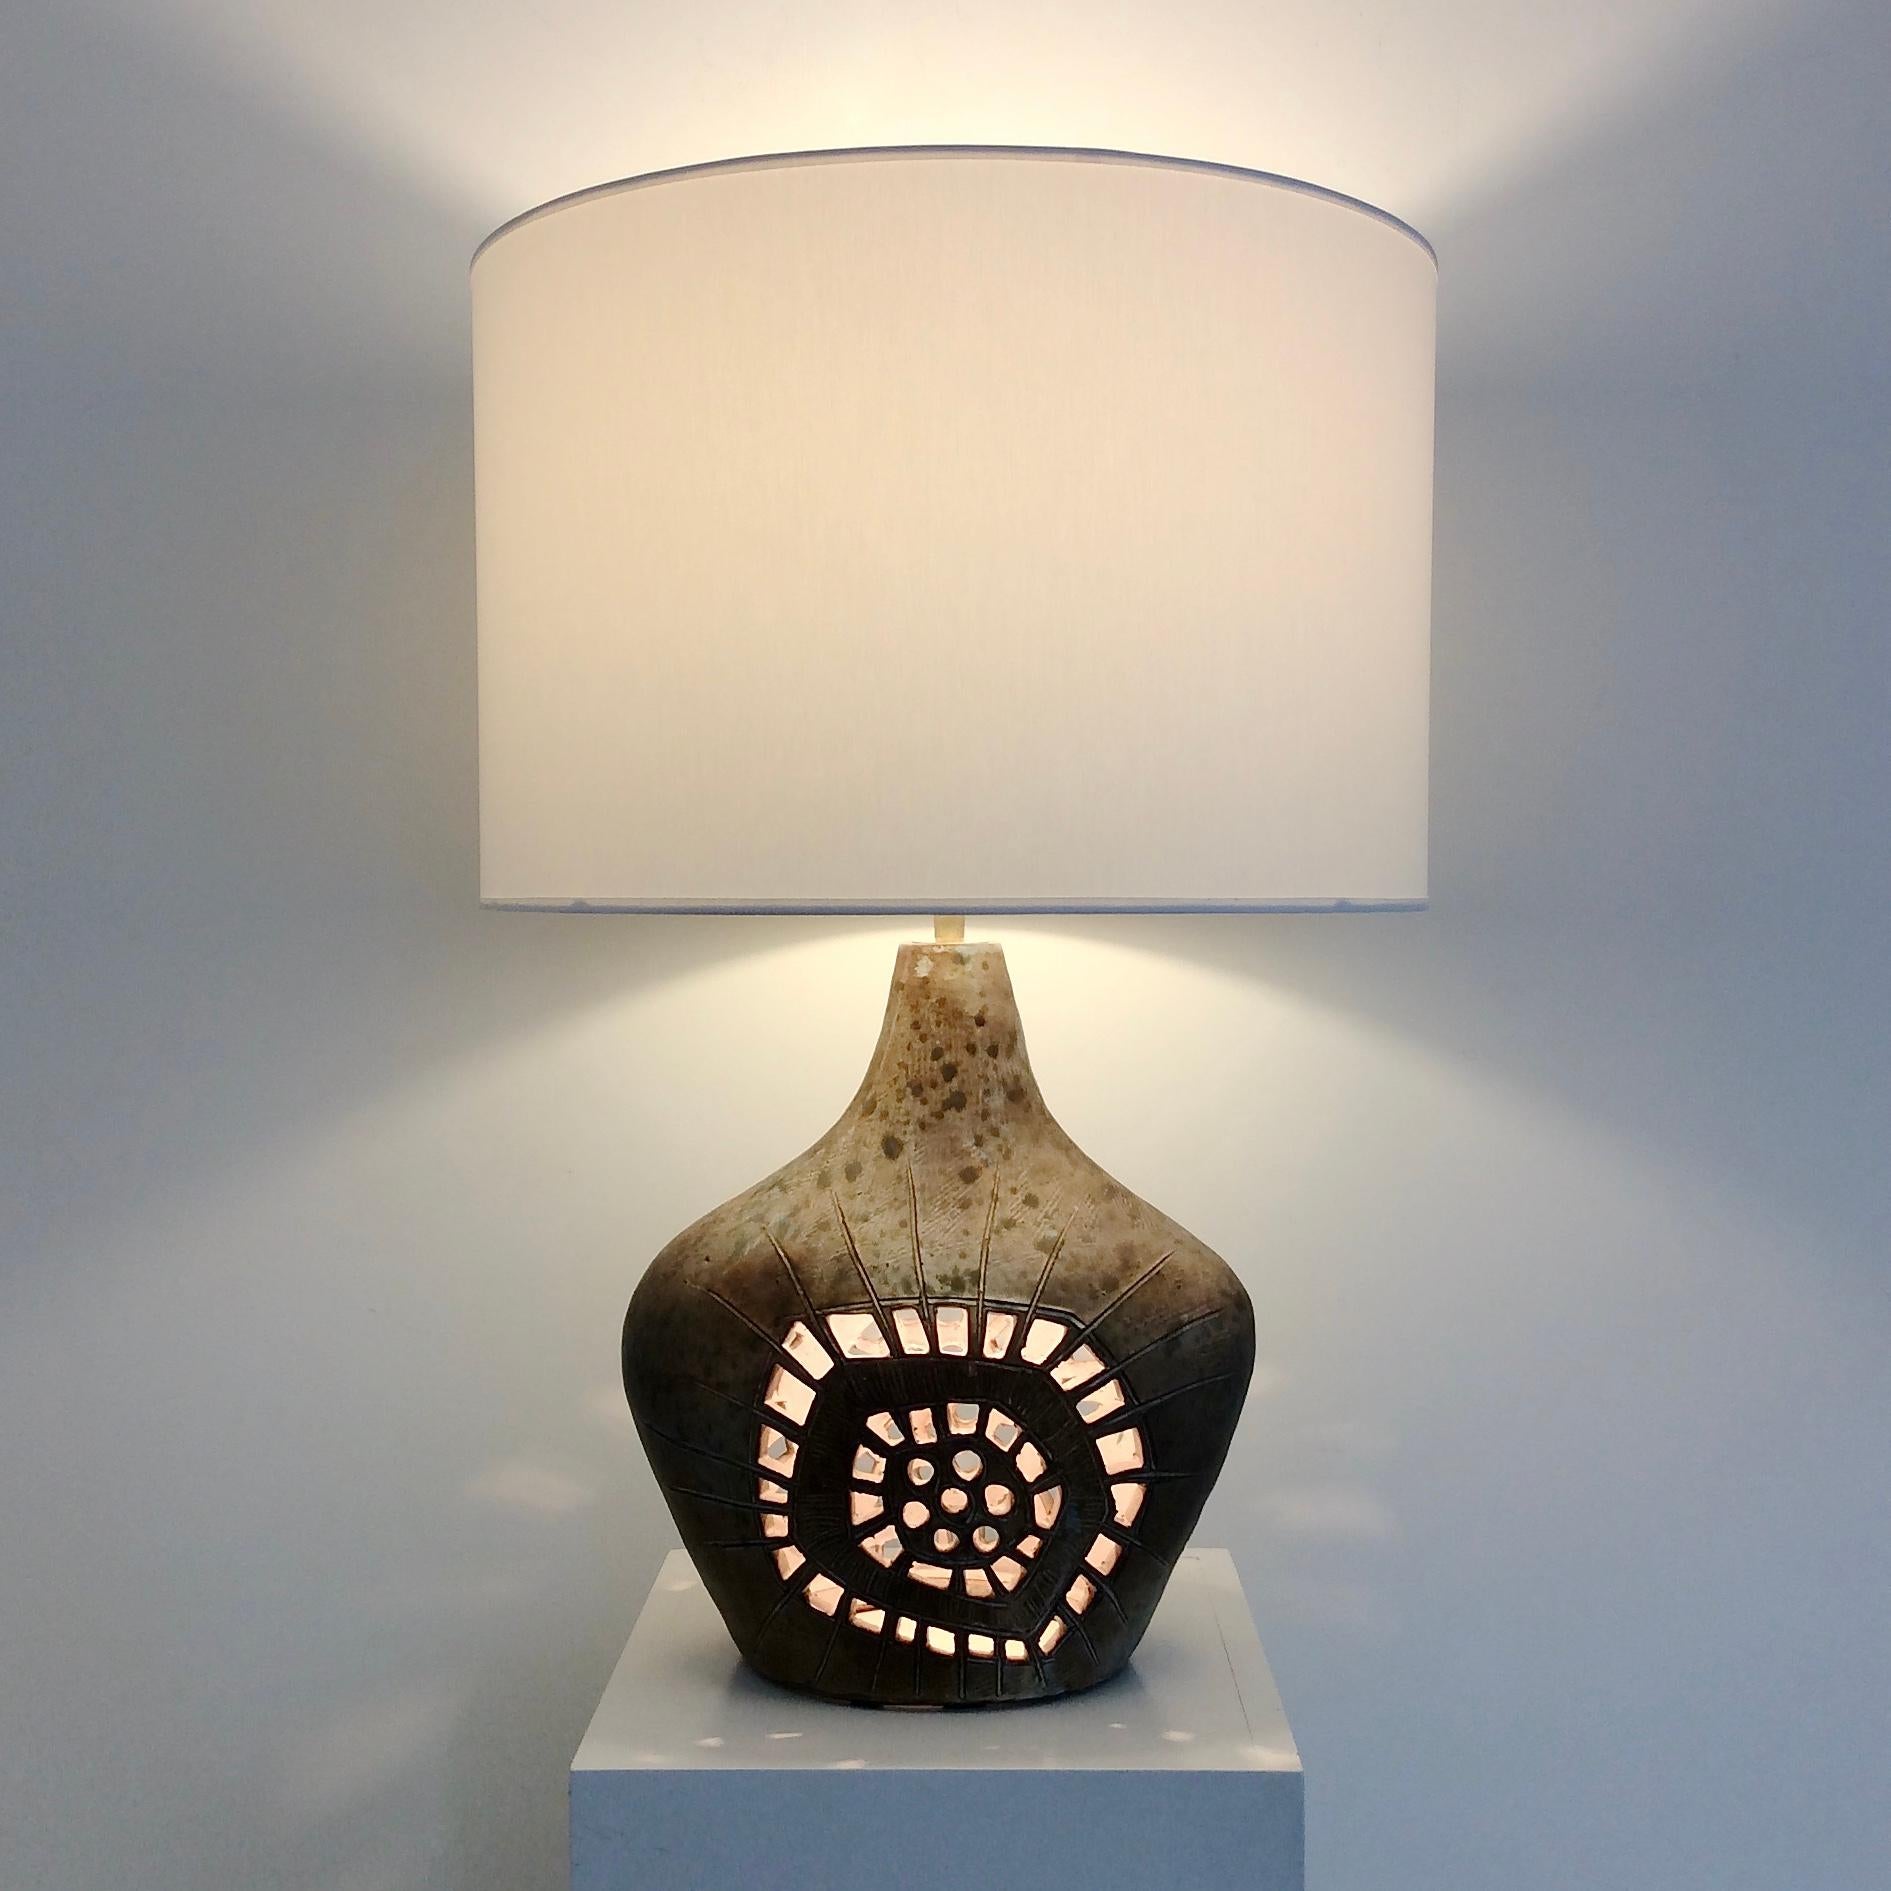 Nice Agnes Escala ceramic table lamp, circa 1970, France.
Incised stoneware, new fabric shade.
2 Lights, rewired.
Dimensions: 64 cm total height, diameter of the shade: 43 cm. Height of the ceramic alone: 34 cm.
All purchases are covered by our